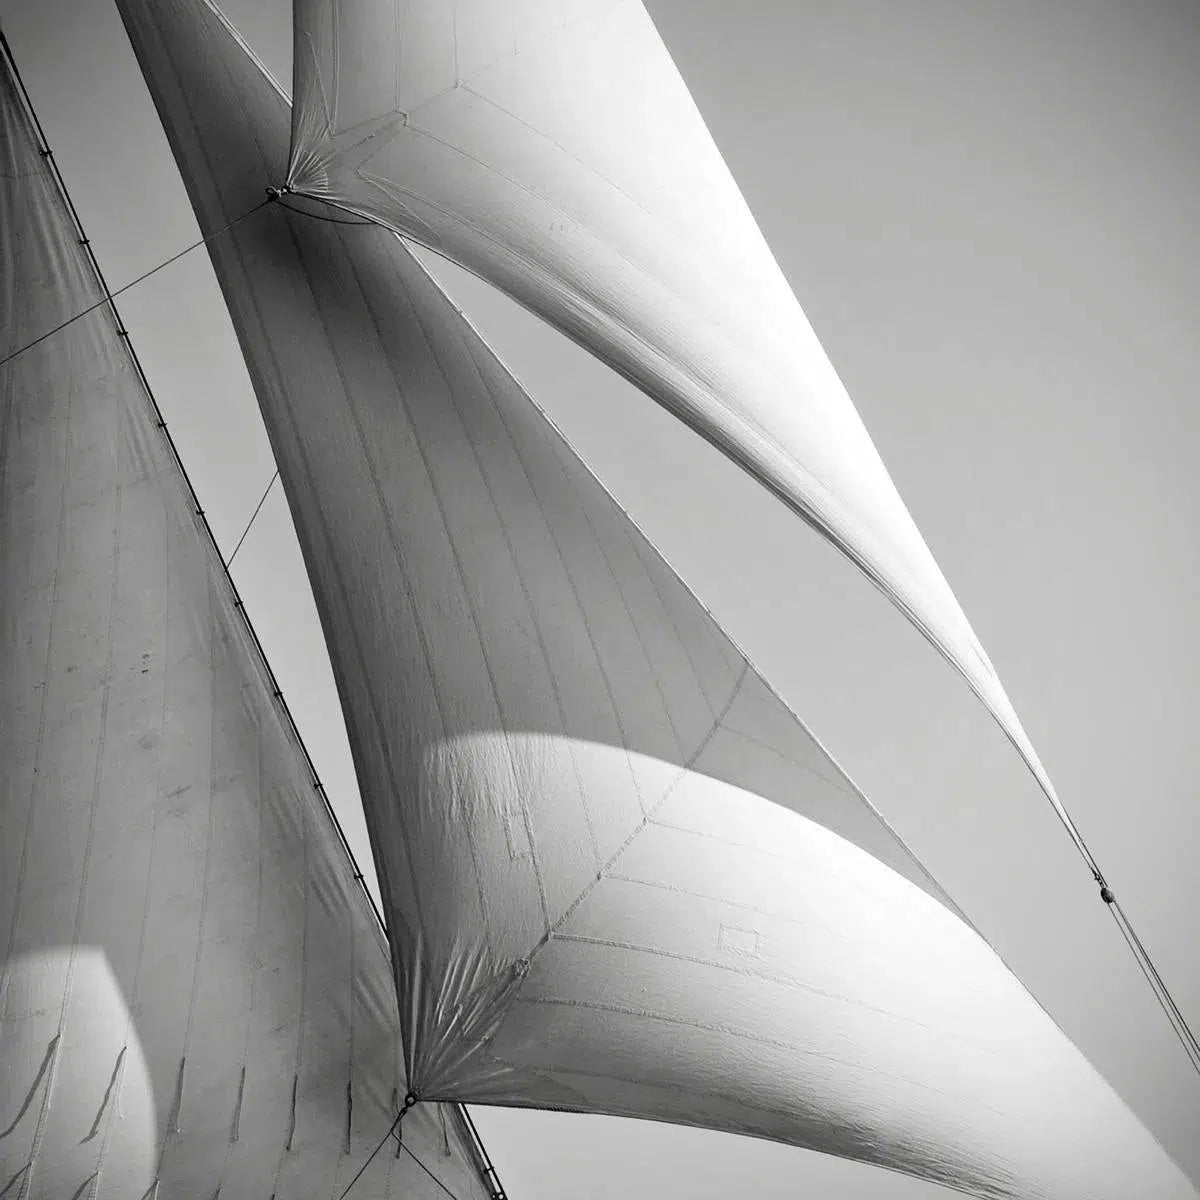 Sails of Avel, by Jonathan Chritchley-PurePhoto